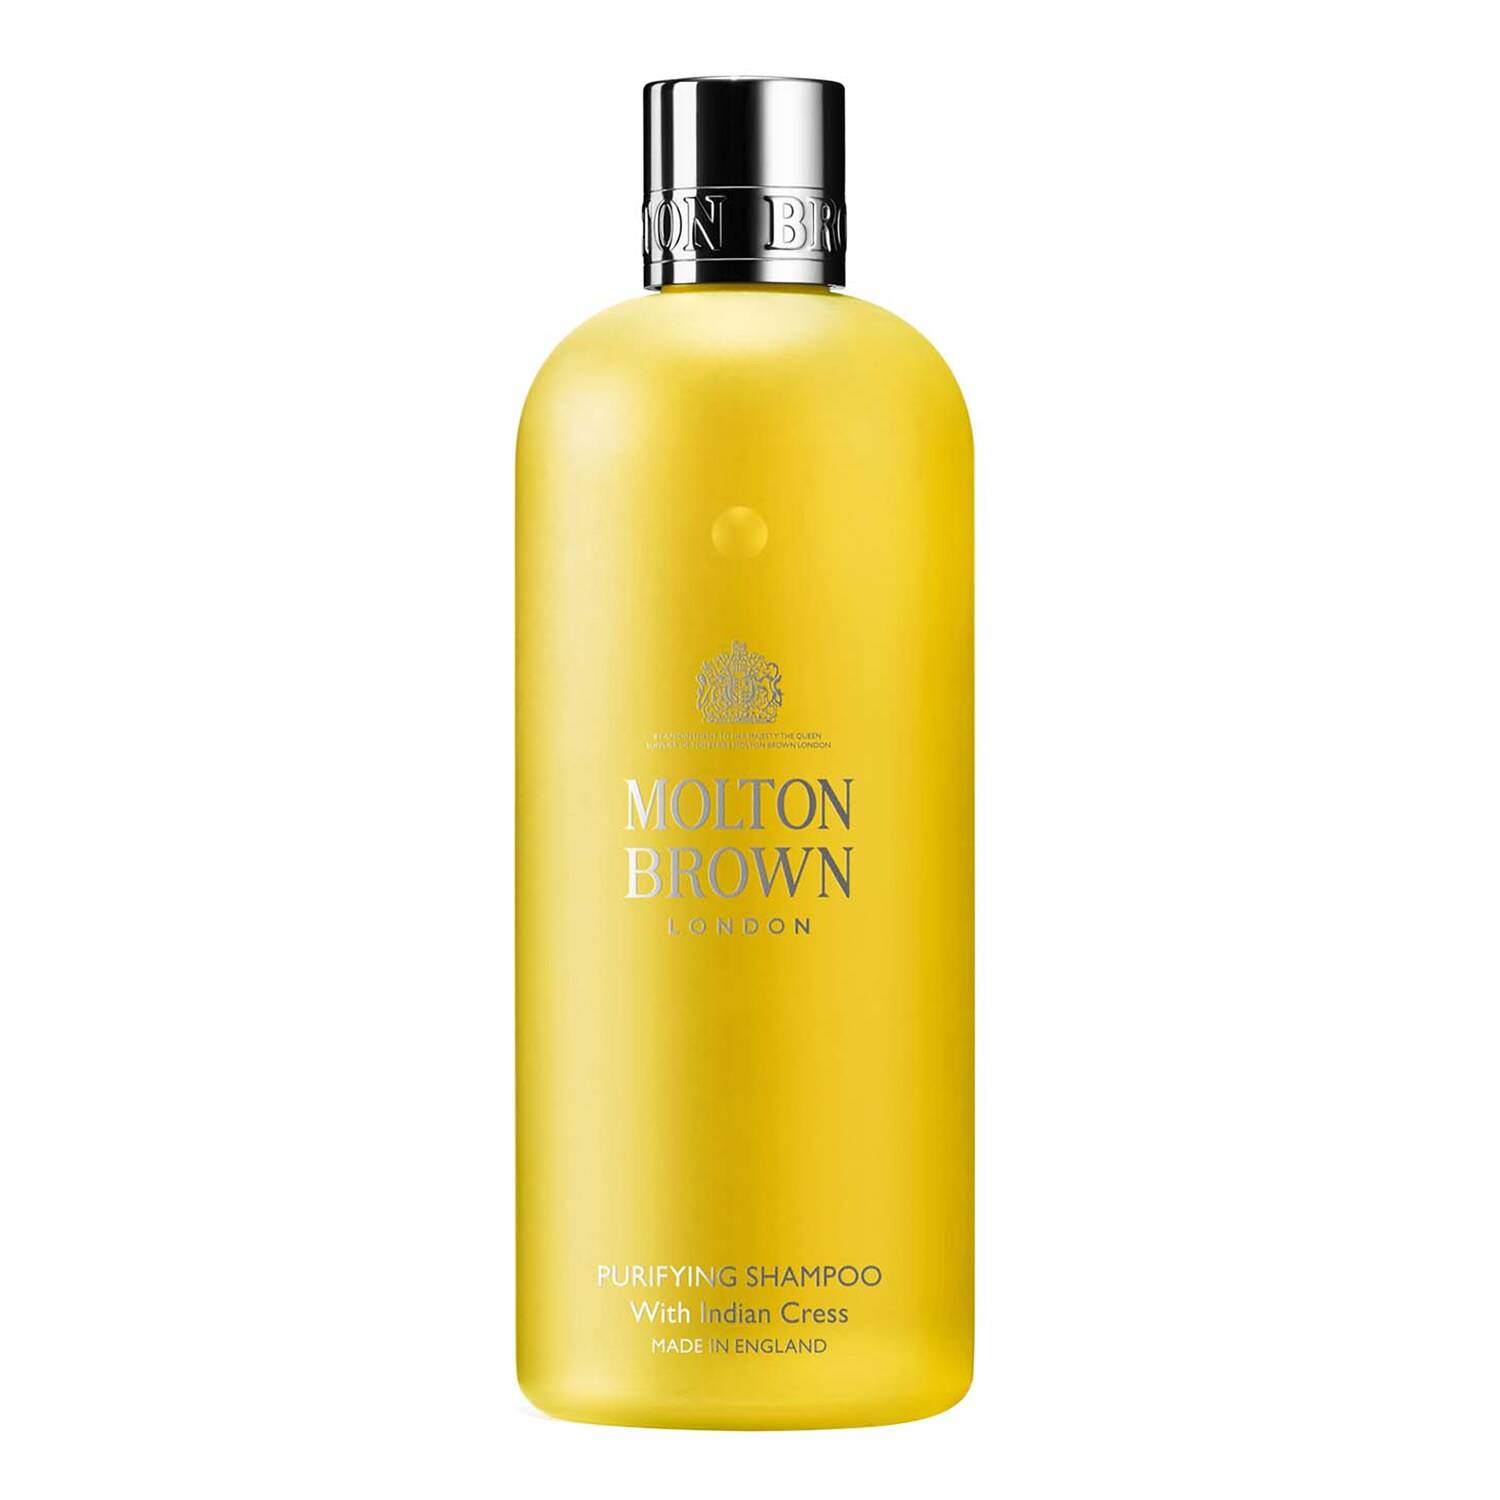 MOLTON BROWN Purifying Shampoo with Indian Cress 300ml